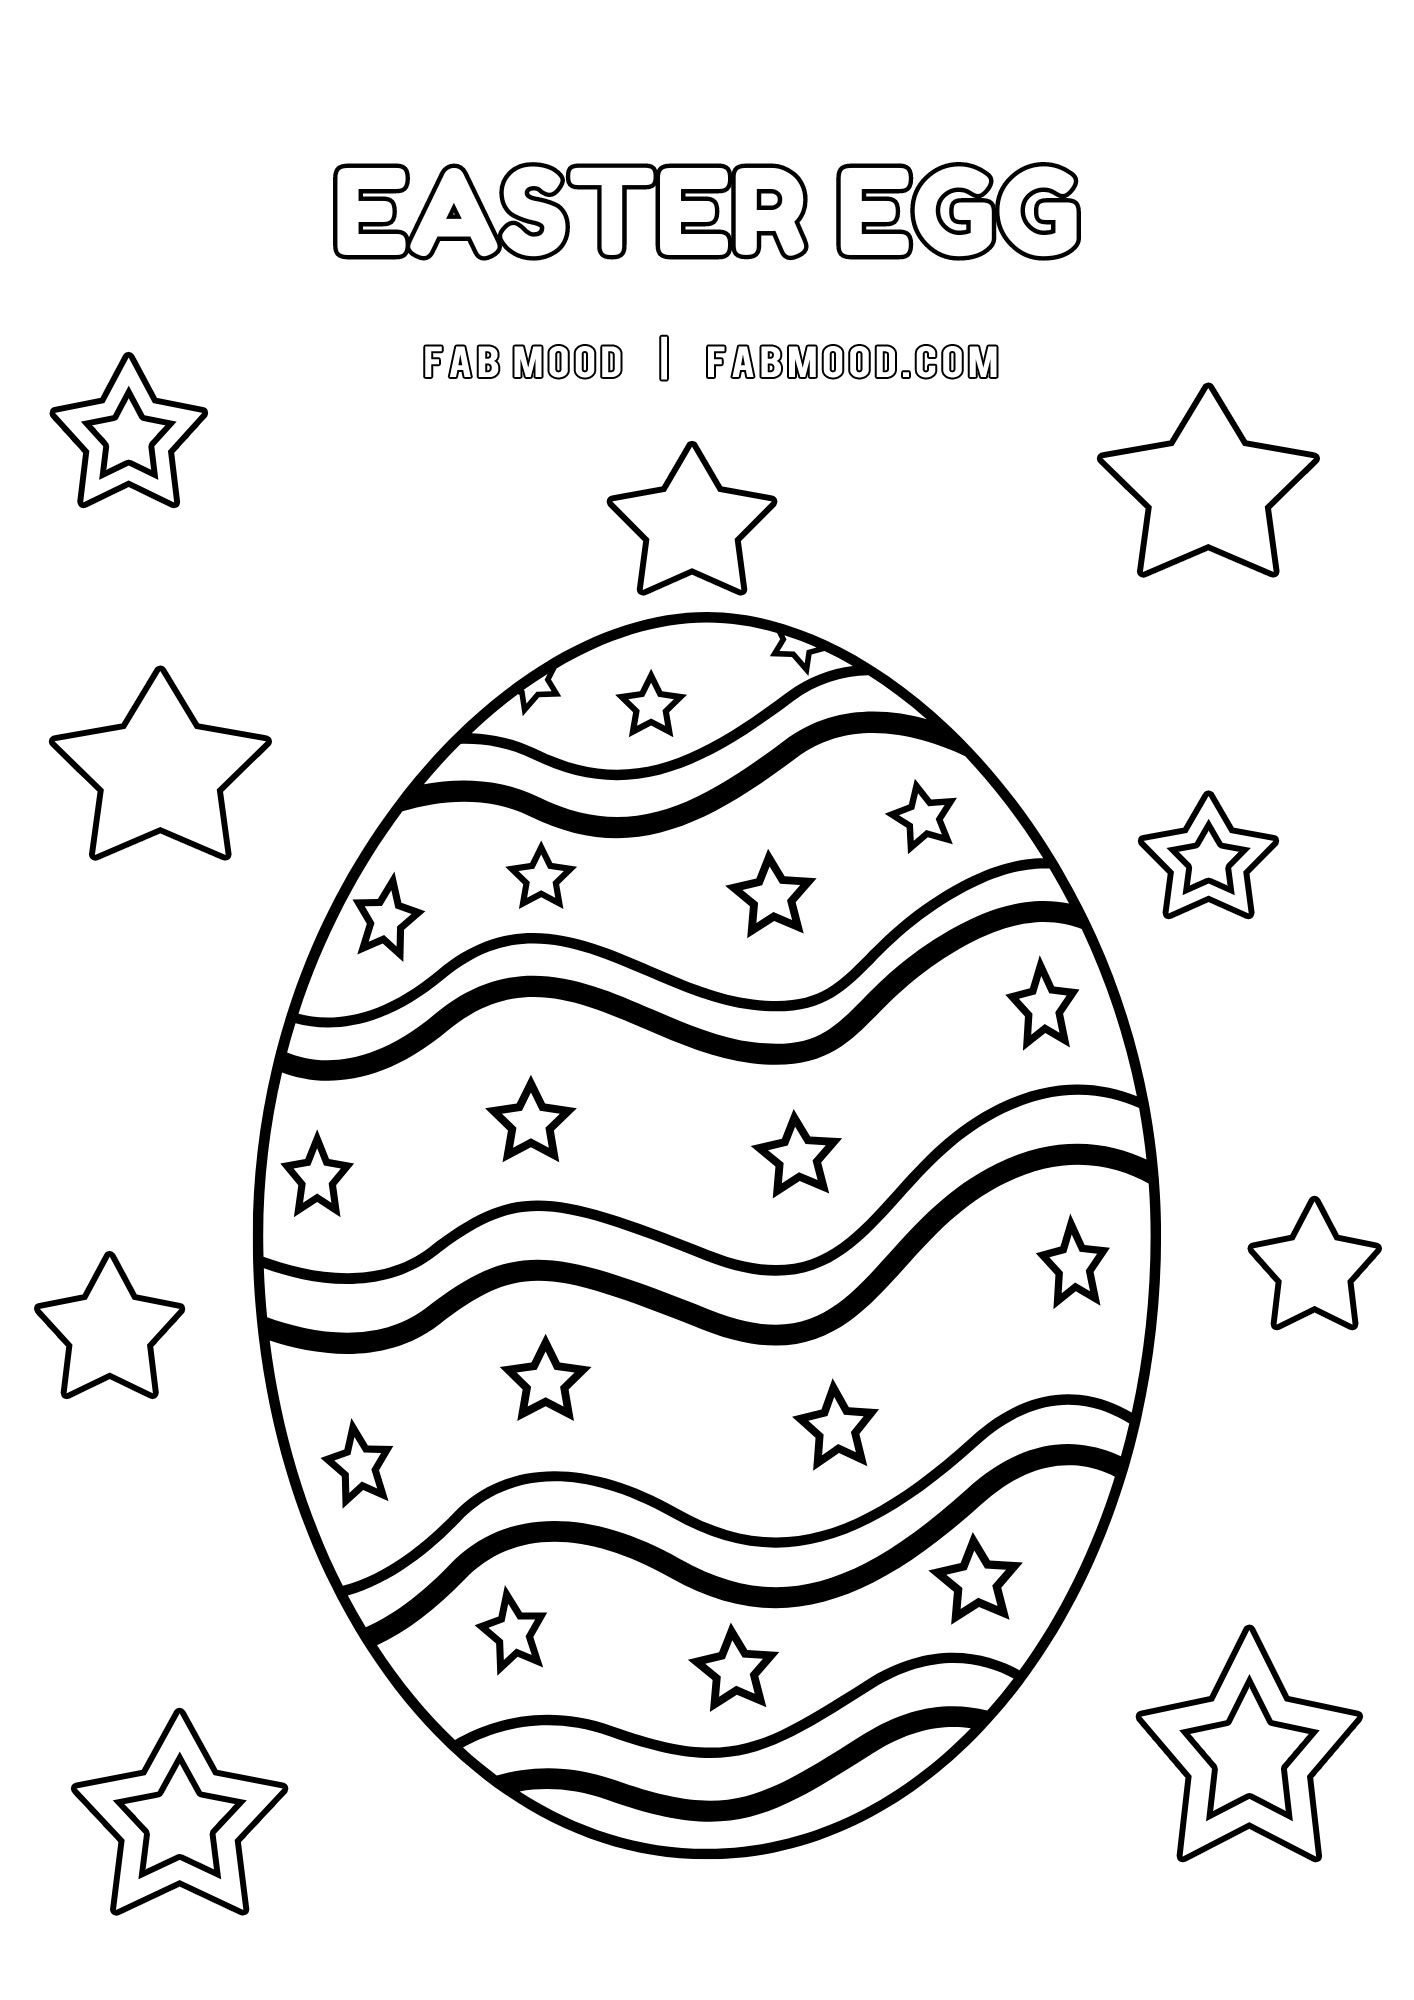 FREE 10 Easter Colouring Pictures : Easter Egg & Stars